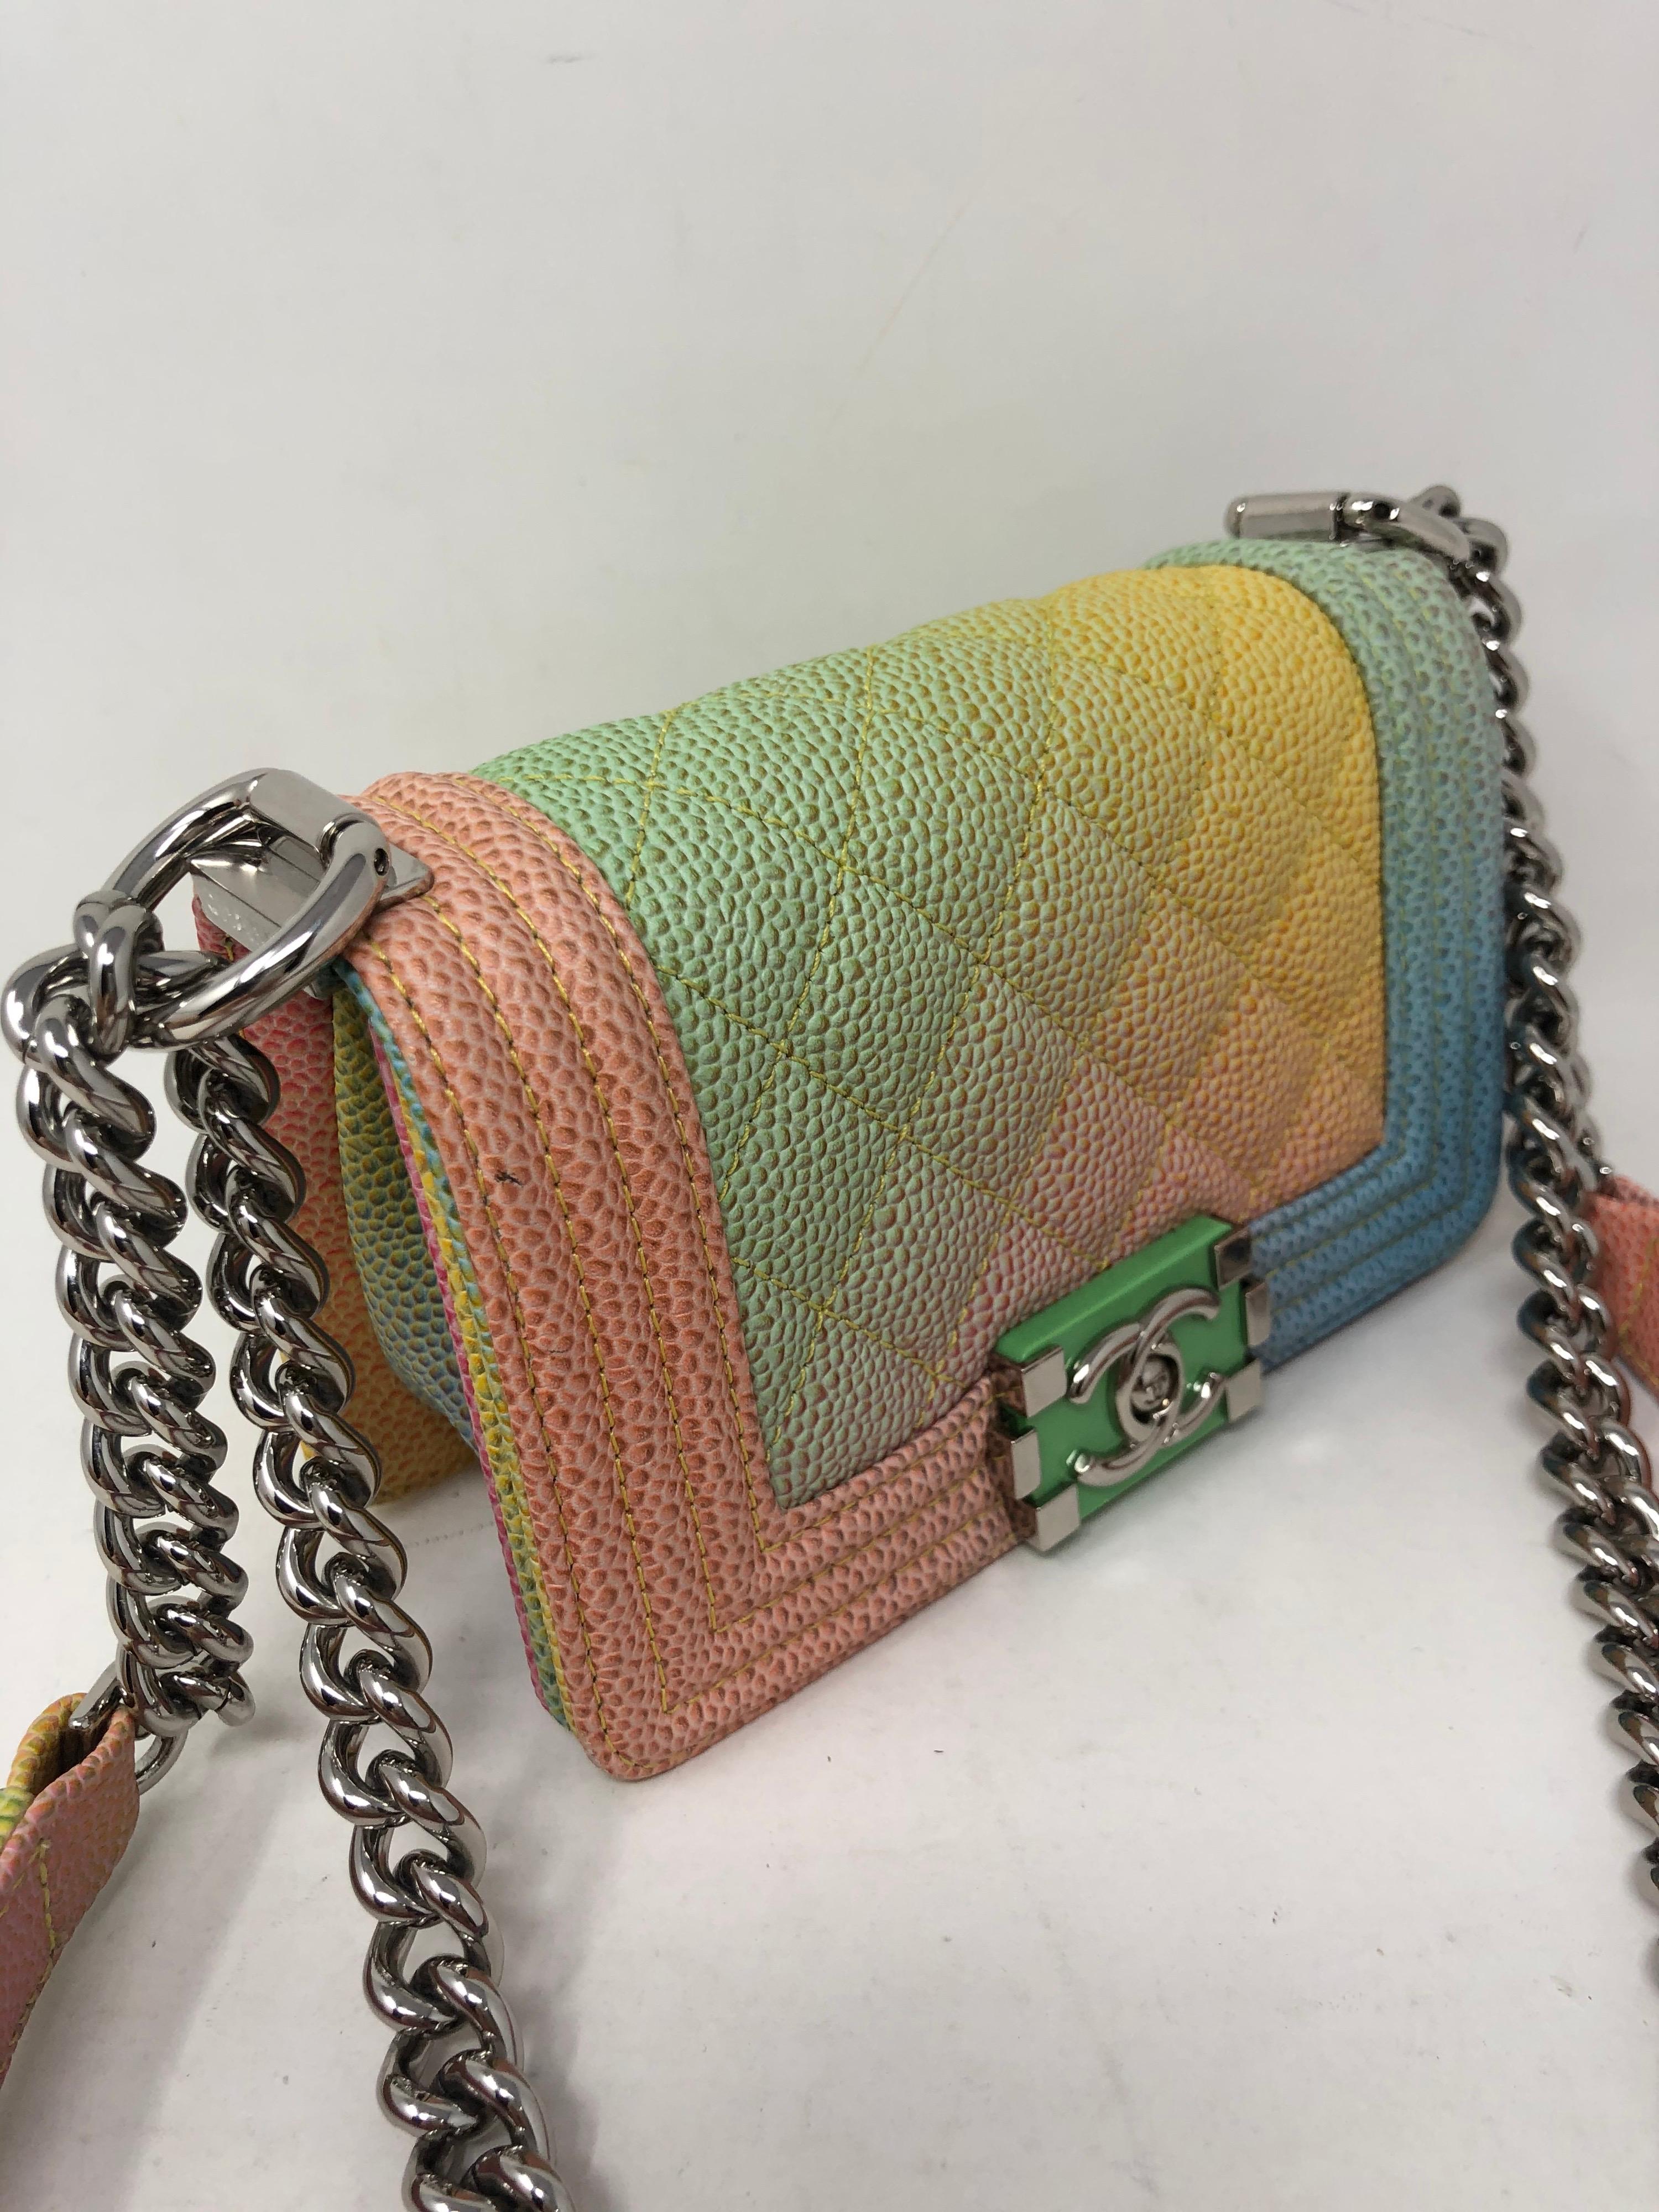 Chanel Mini Rainbow Pastel Boy Bag. Ruthenium hardware. Extra mini size crossbody bag. Can be doubled to worn shorter. Mint condition like new. Rare collector's piece. Don't miss out. Guaranteed authentic. 